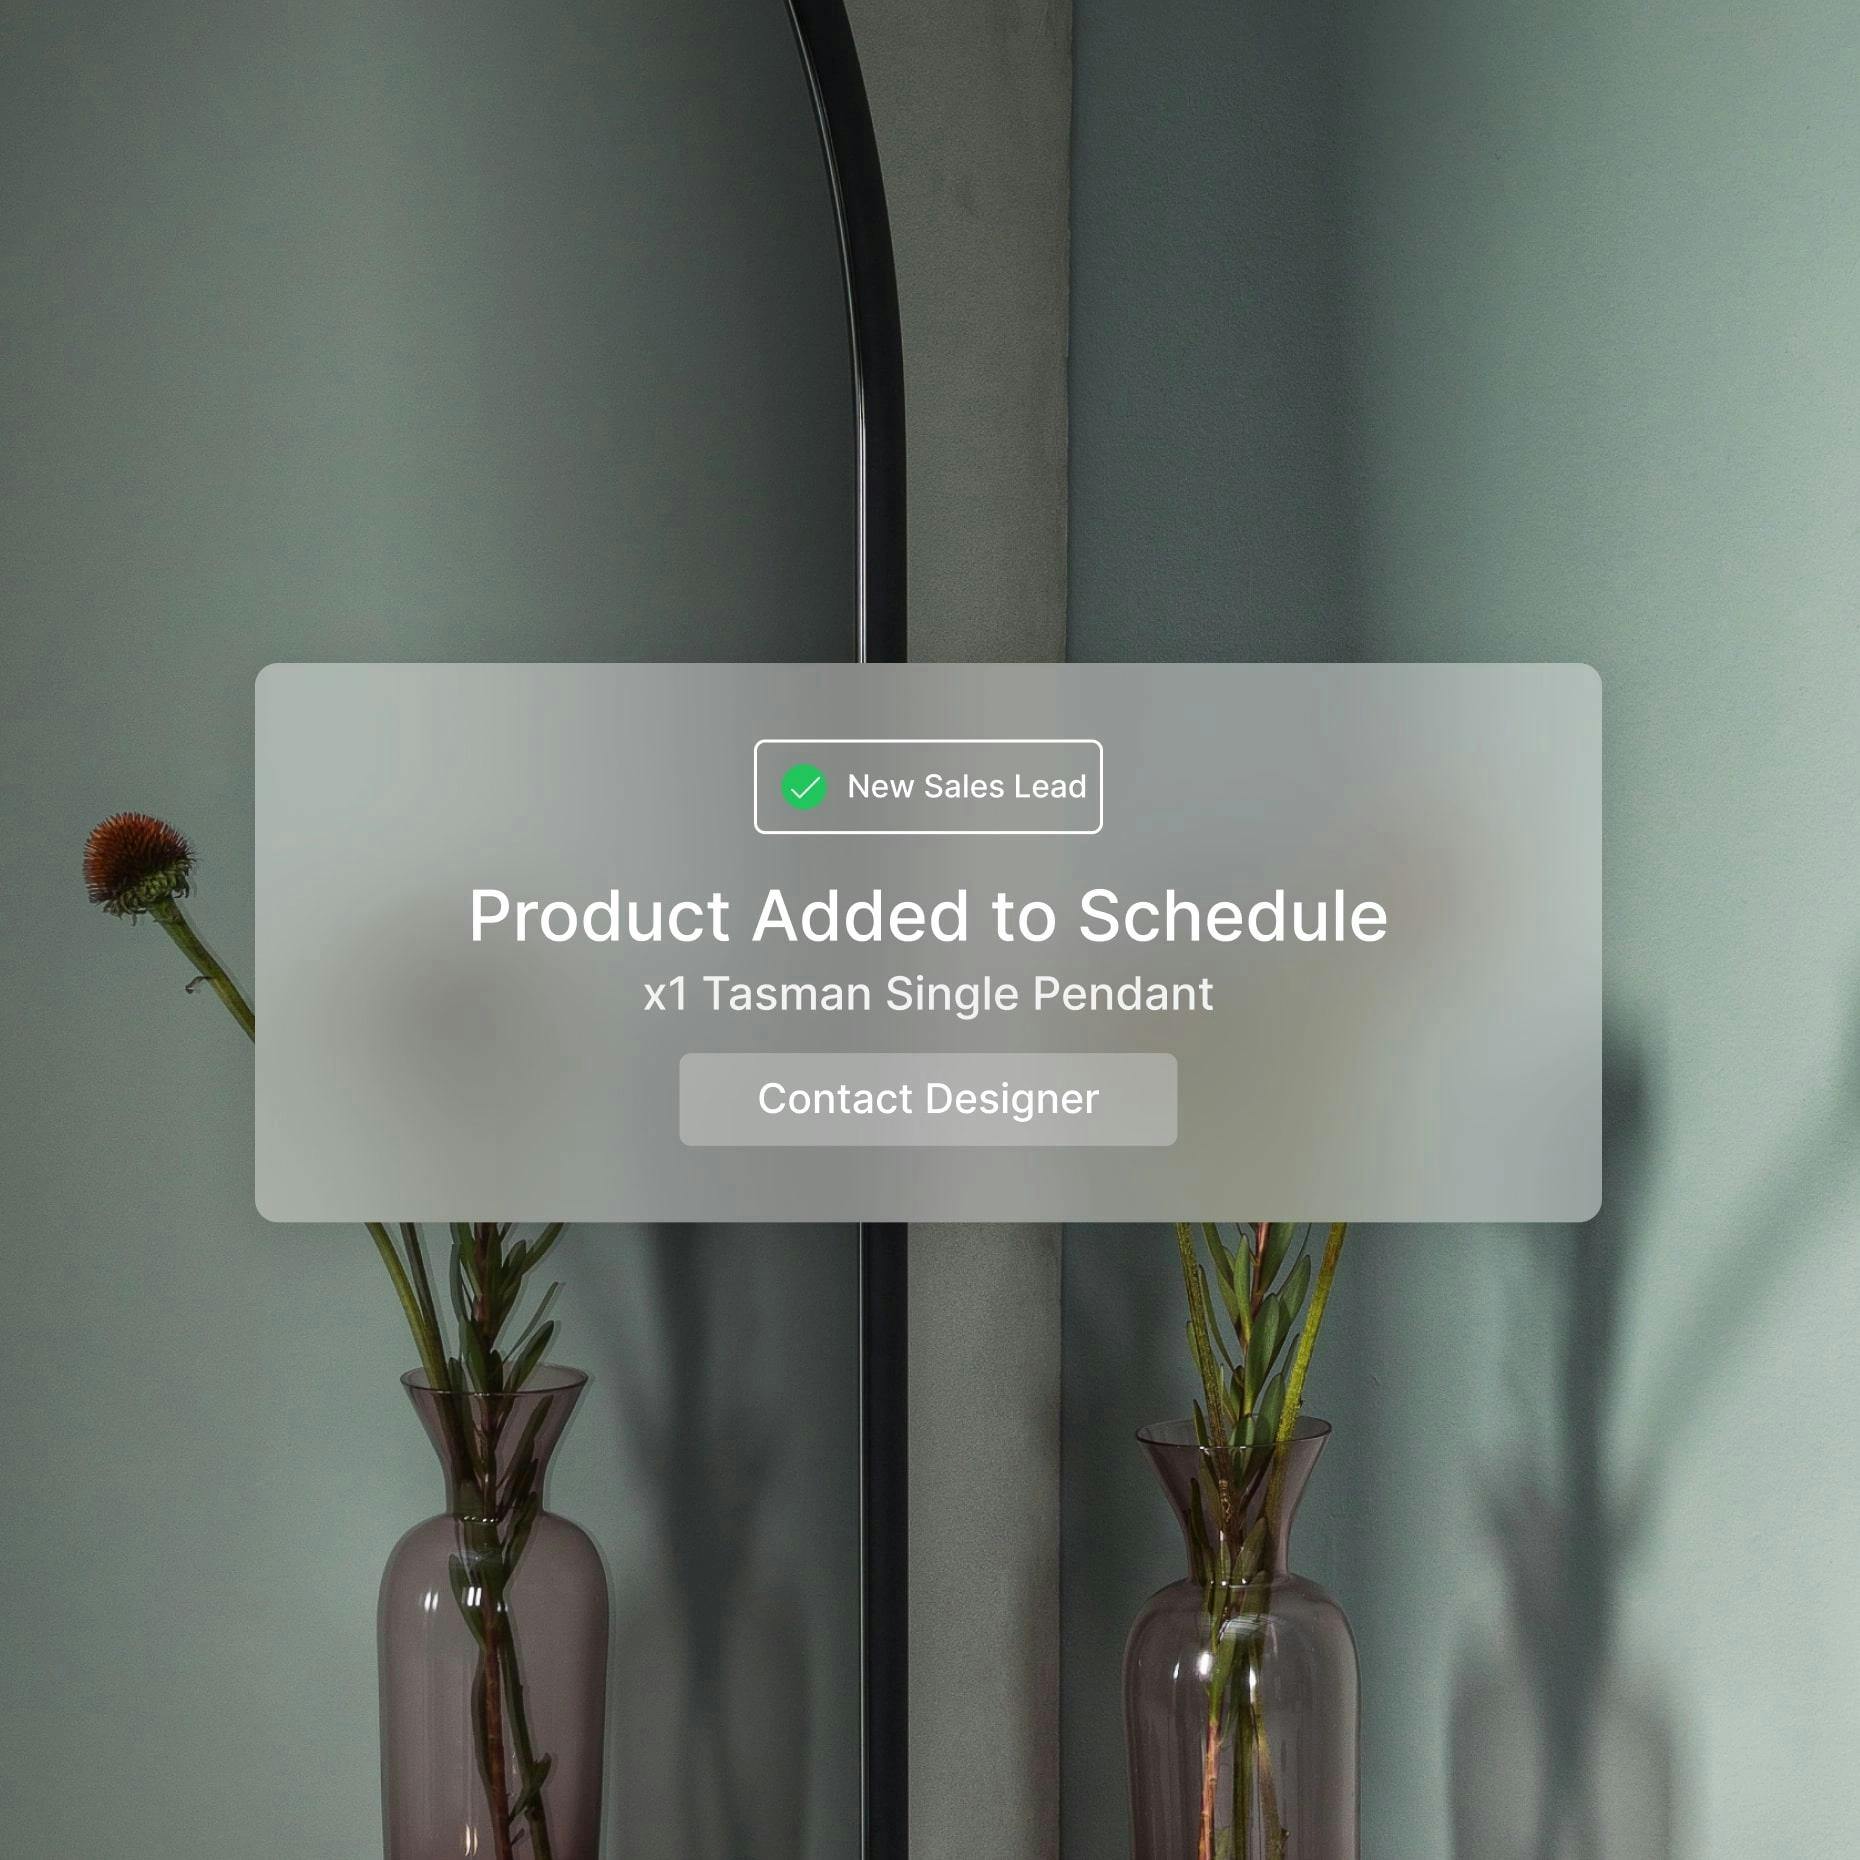 Stay in the loop. Real-time notifications every time your product is specified, right in Programa.